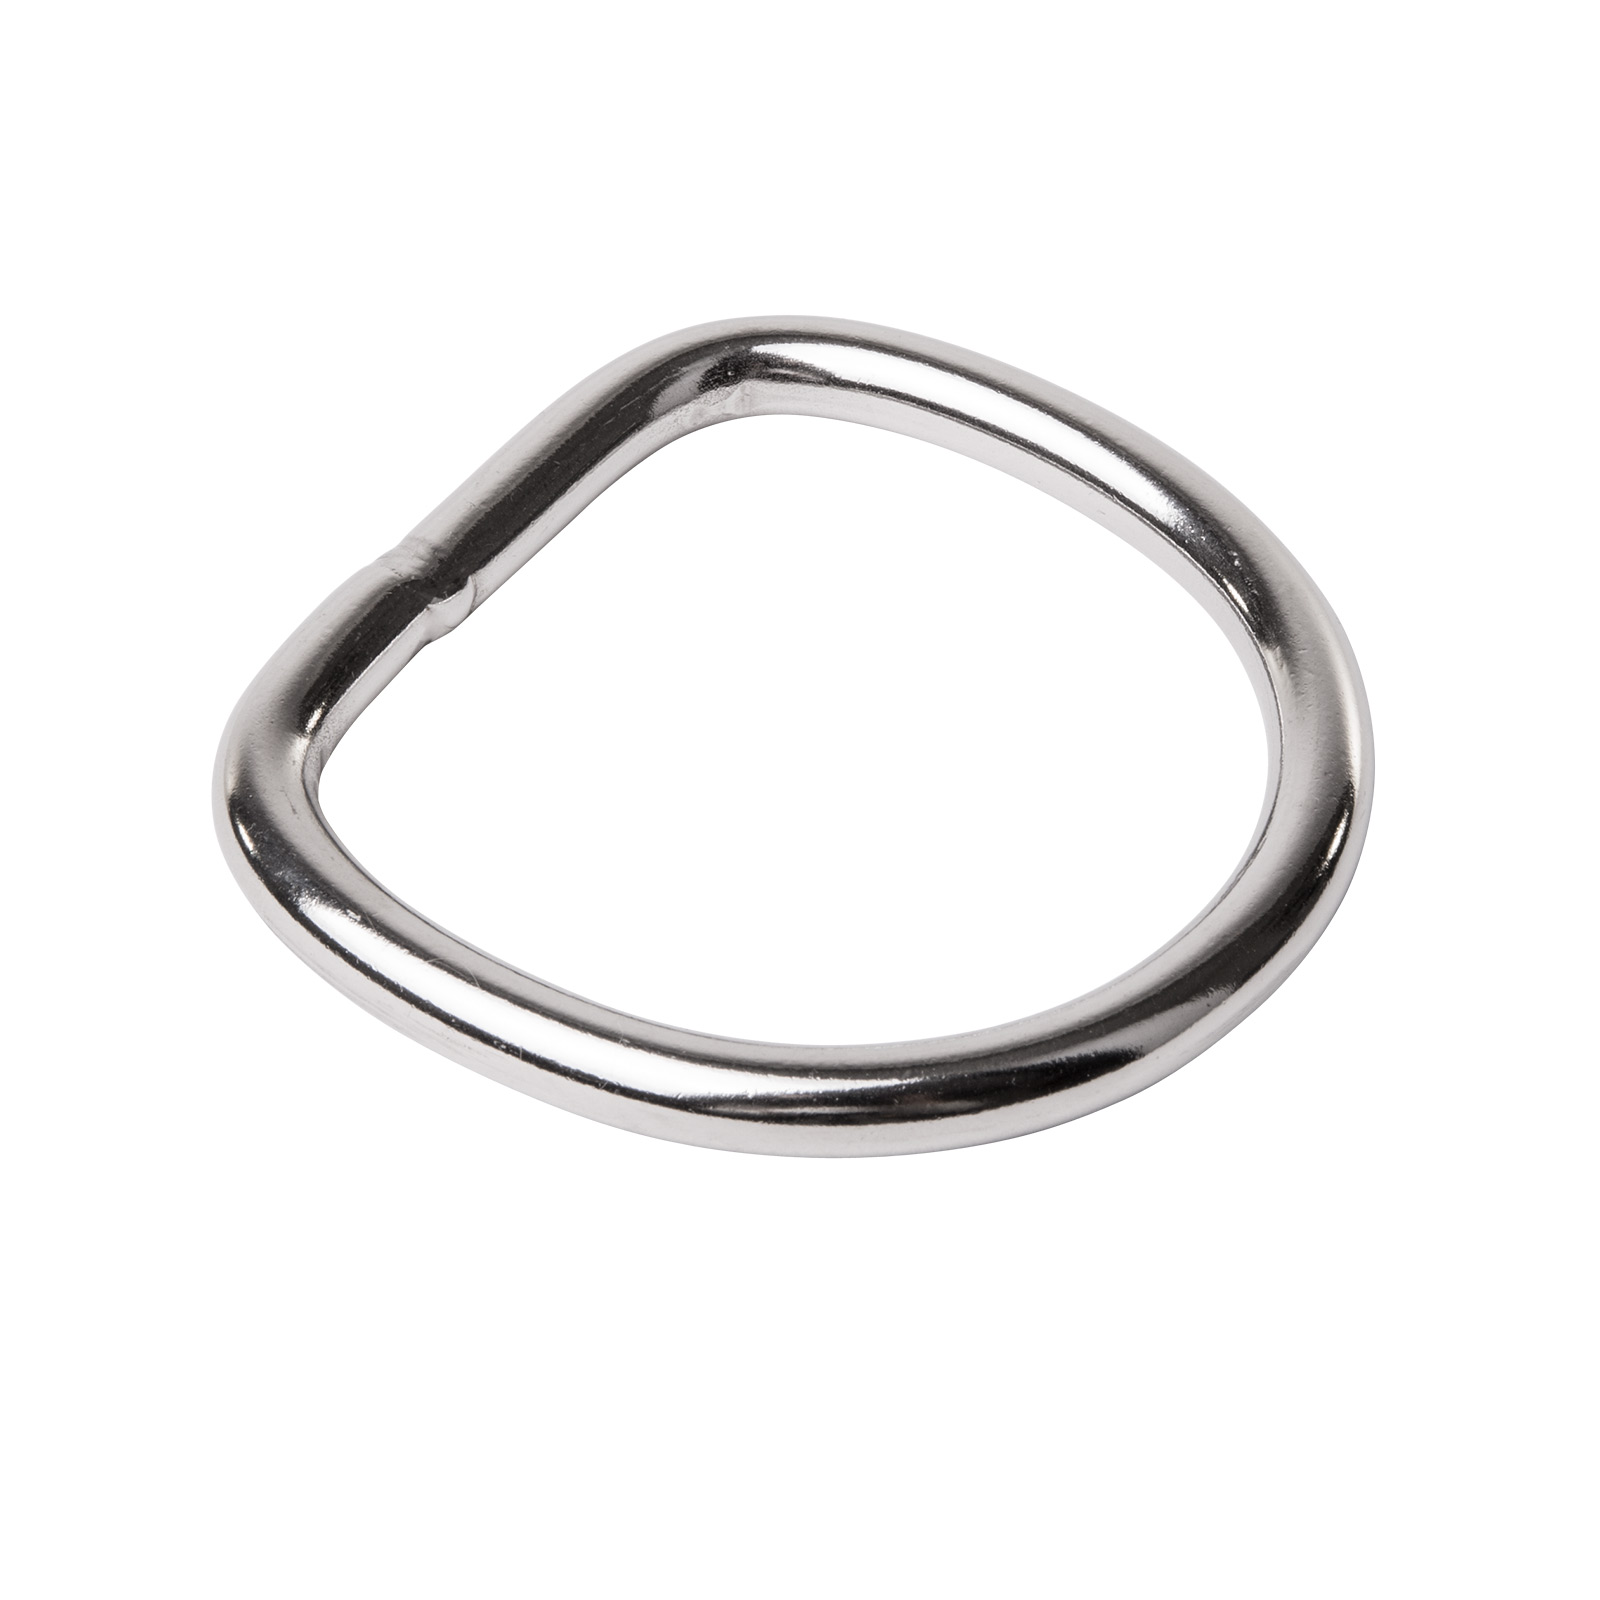 DR-5 8mm FLAT D-RING Stainless Steel